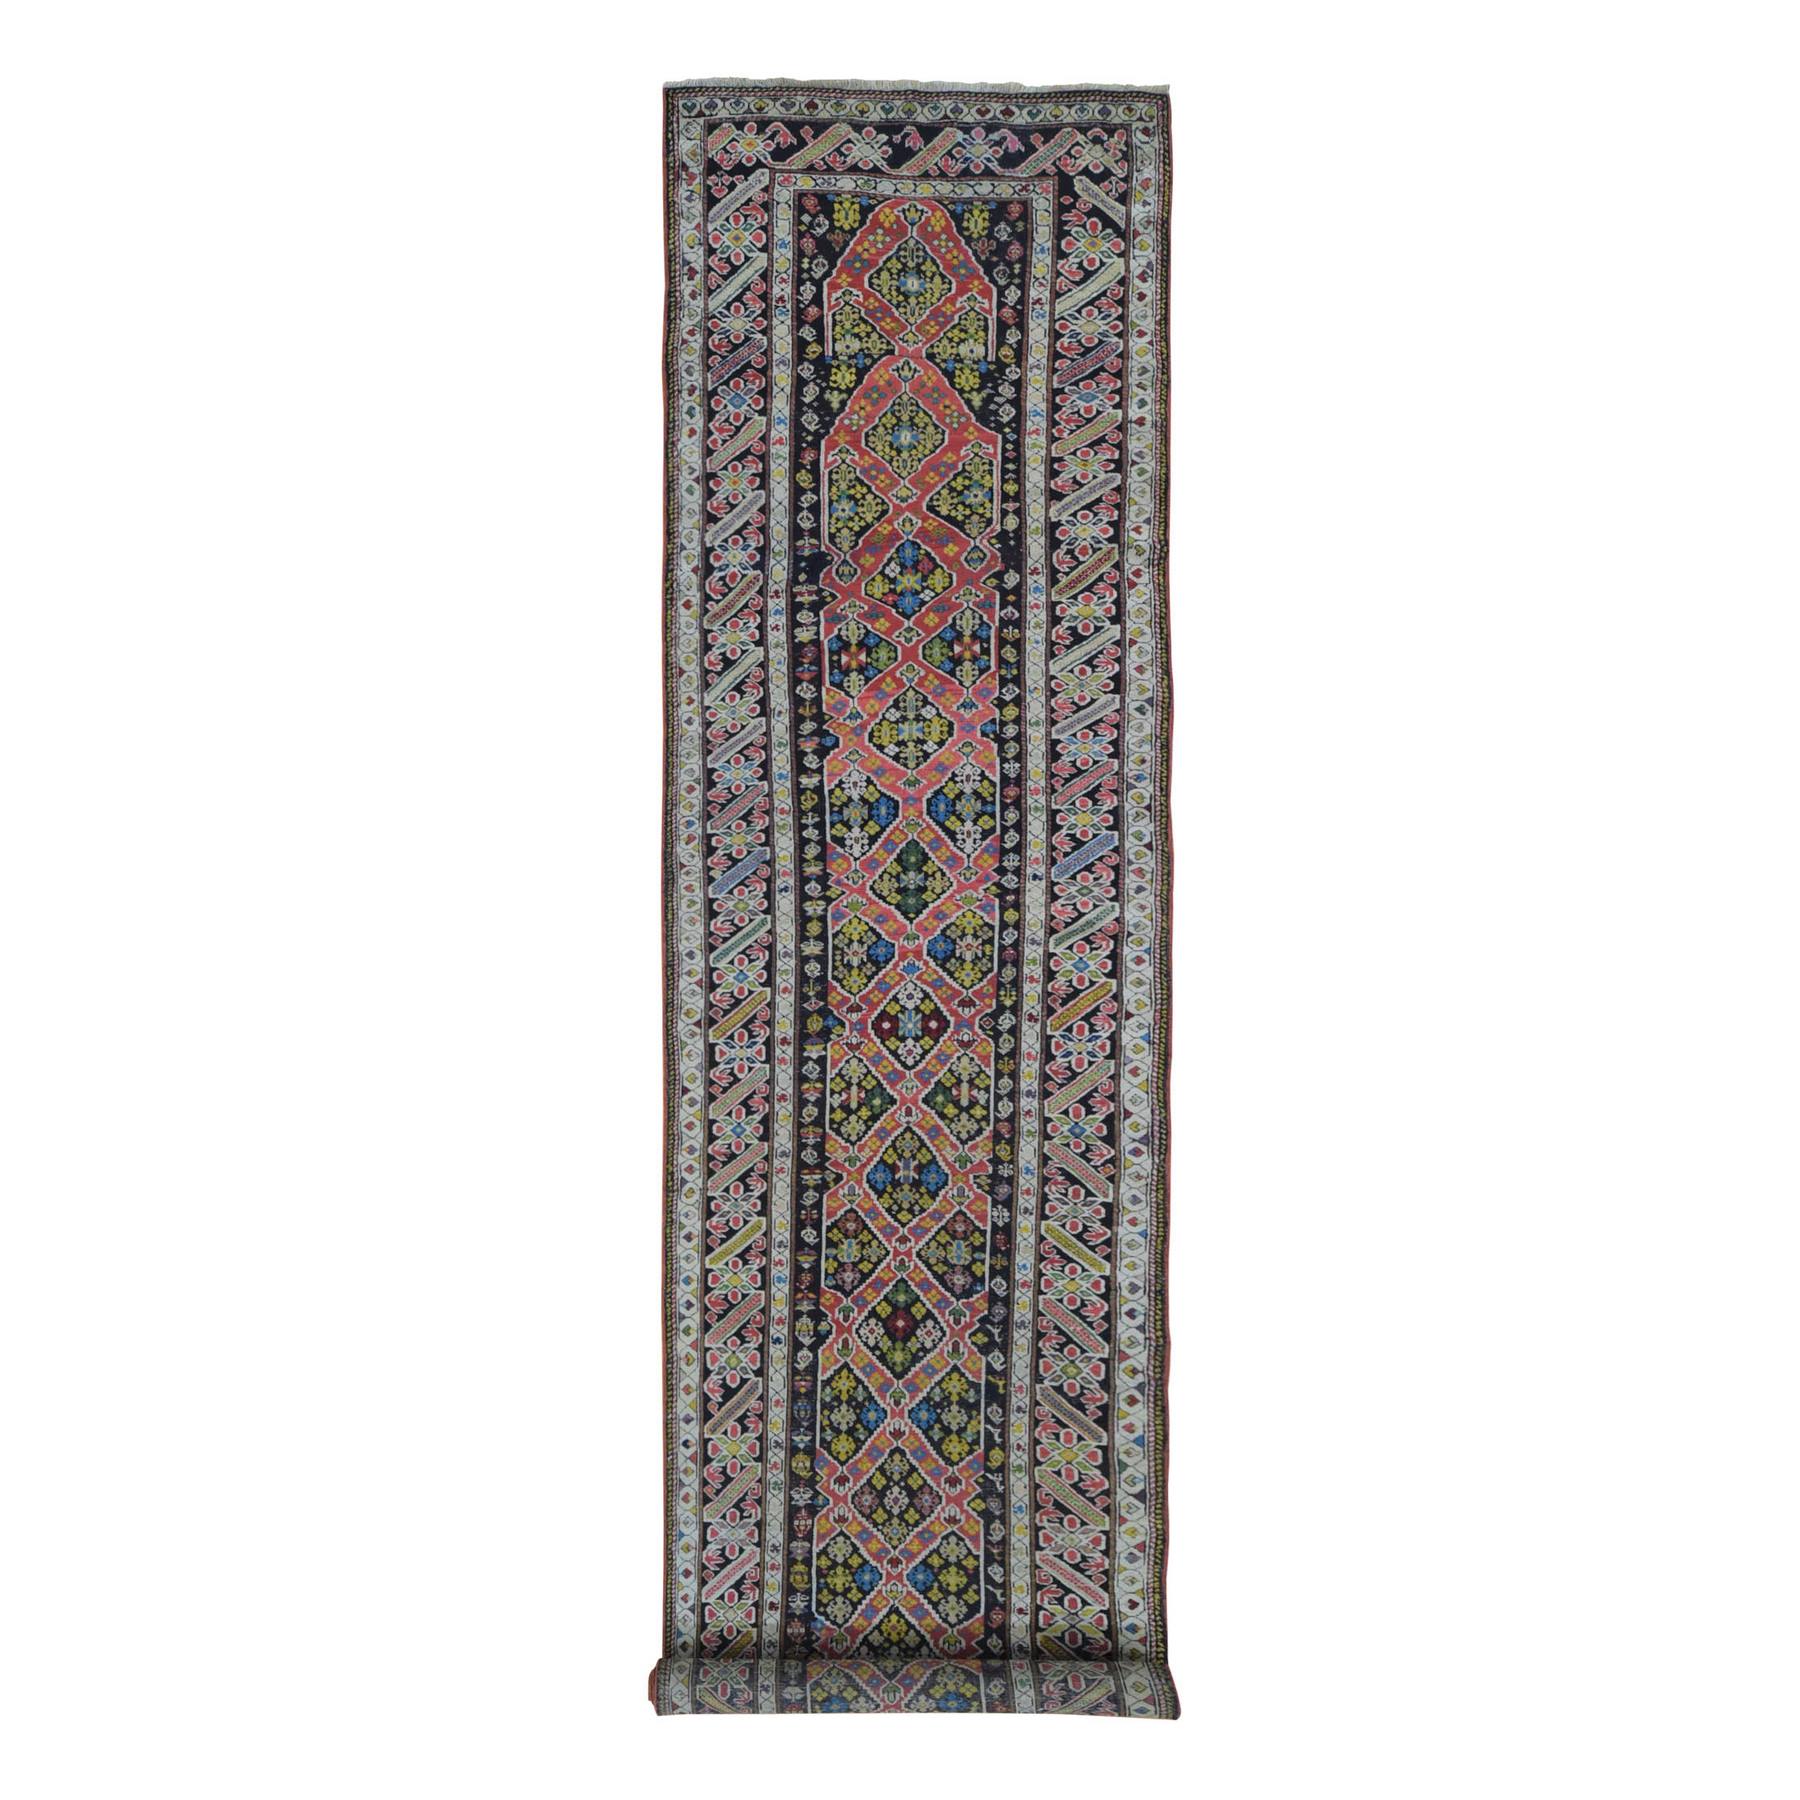 Antique-Hand-Knotted-Rug-334210